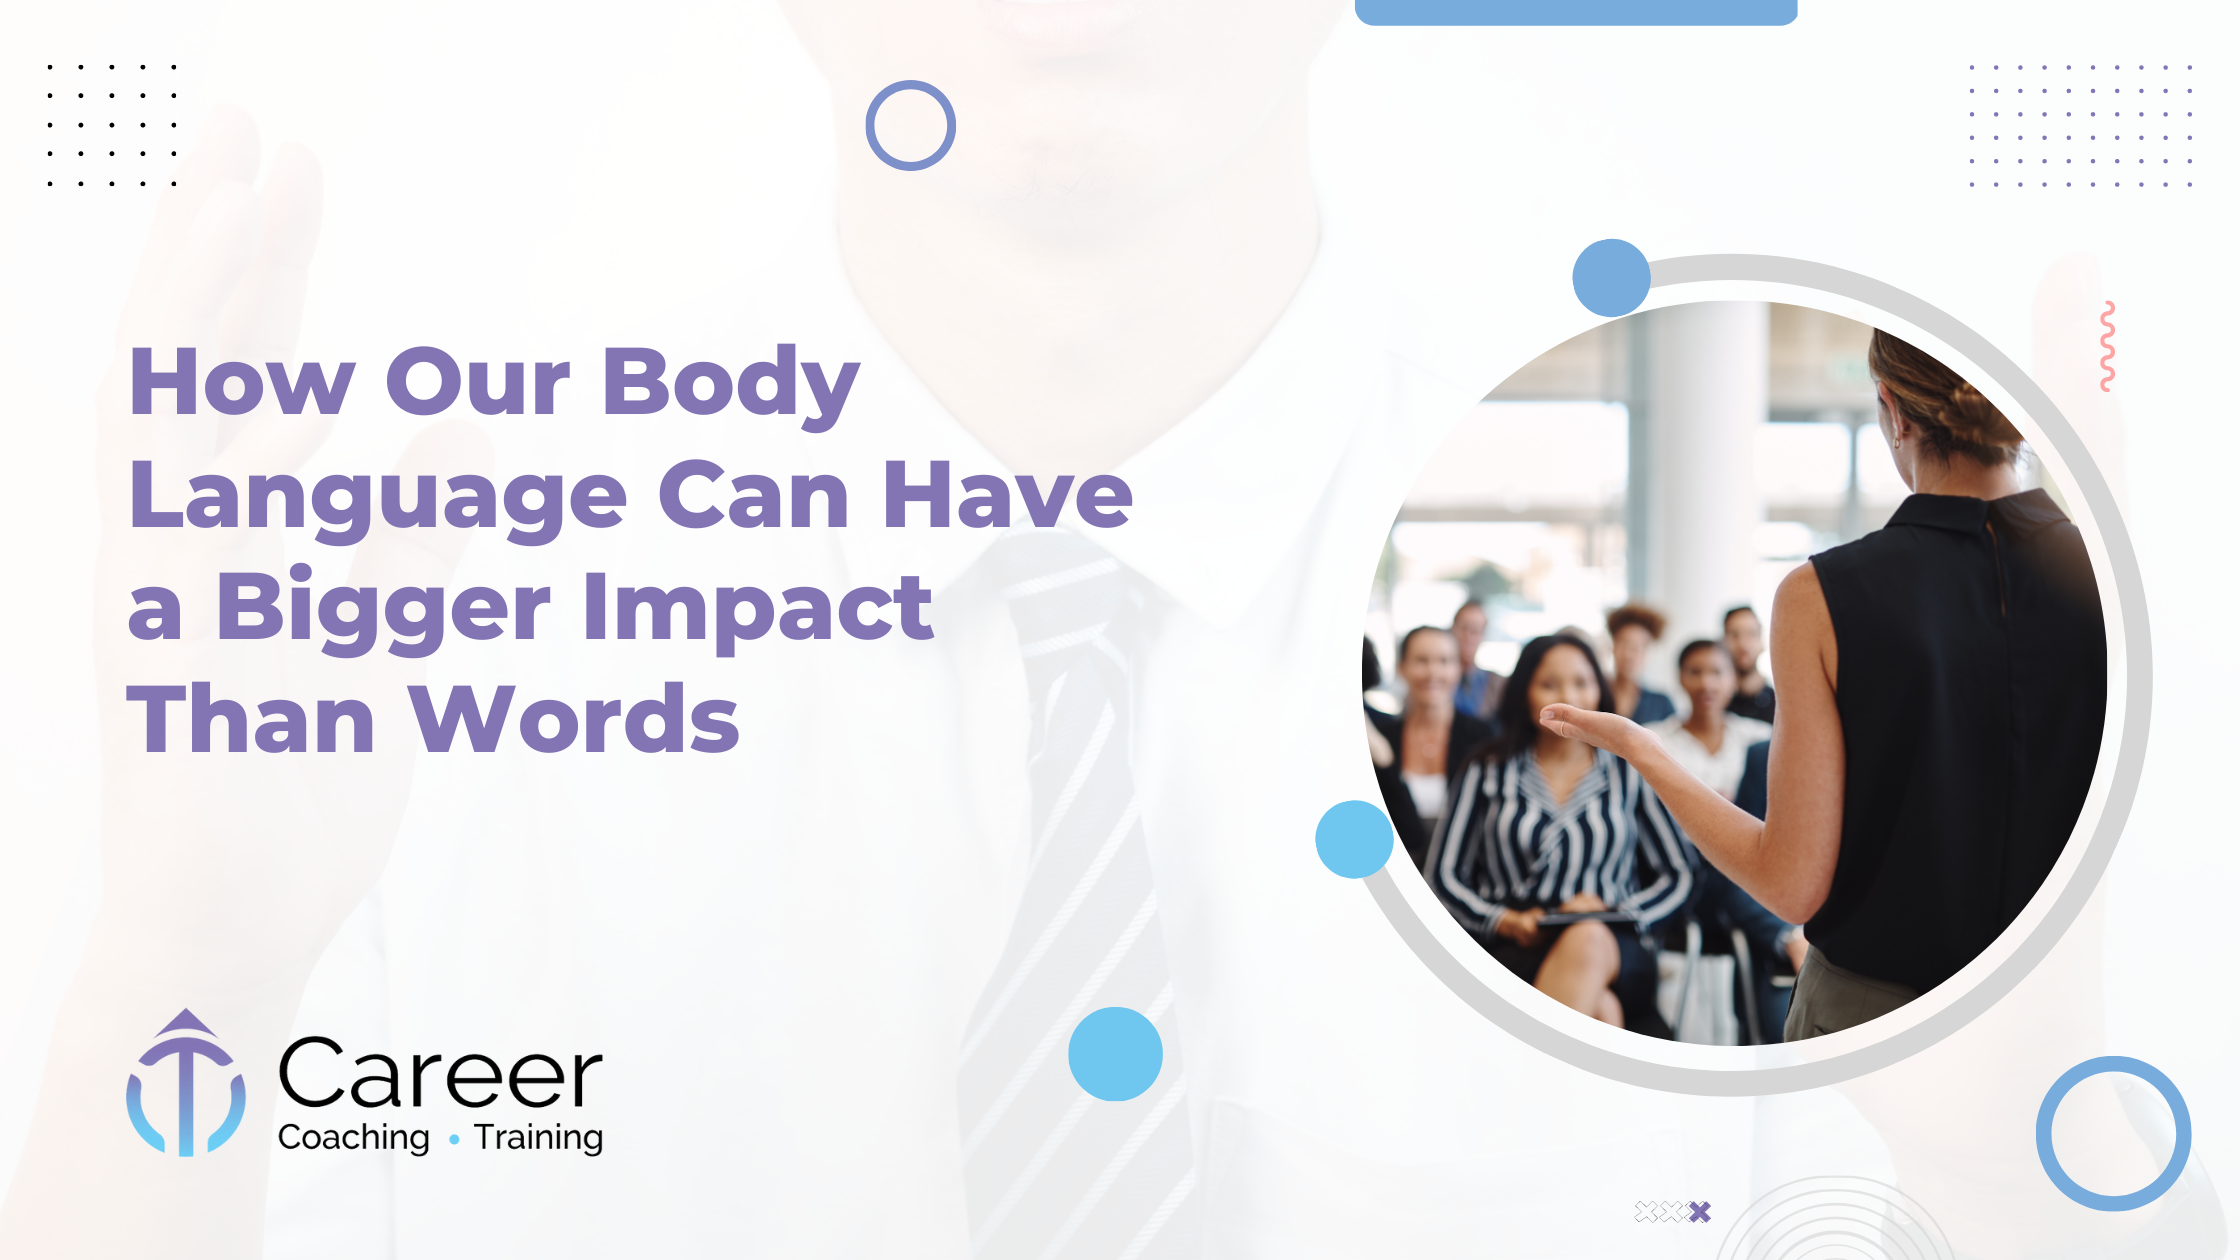 How Our Body Language Can Have a Bigger Impact Than Words